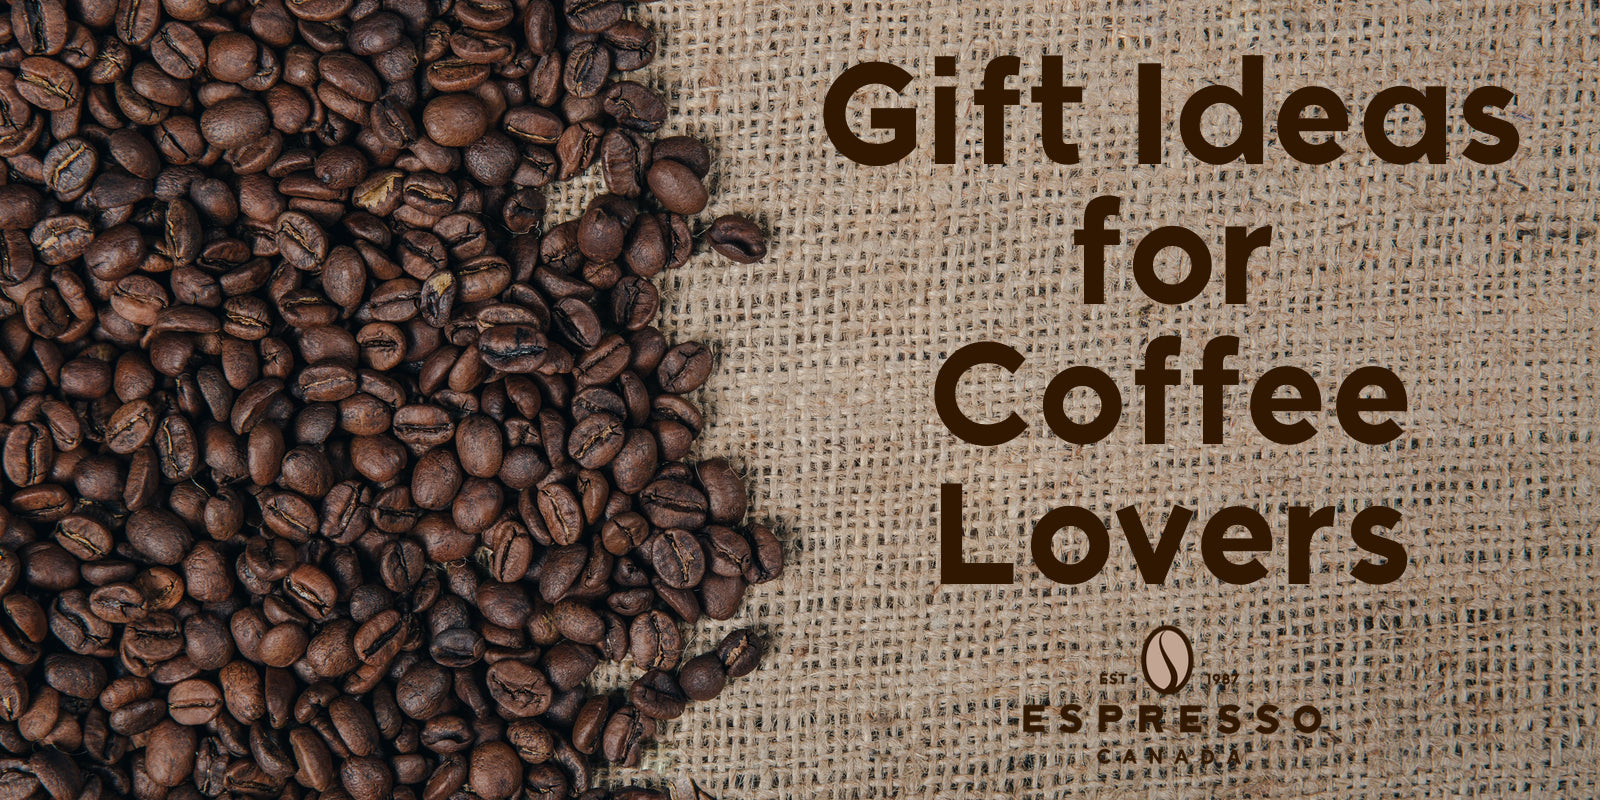 Unique Coffee Gifts for the Coffee Connoisseur